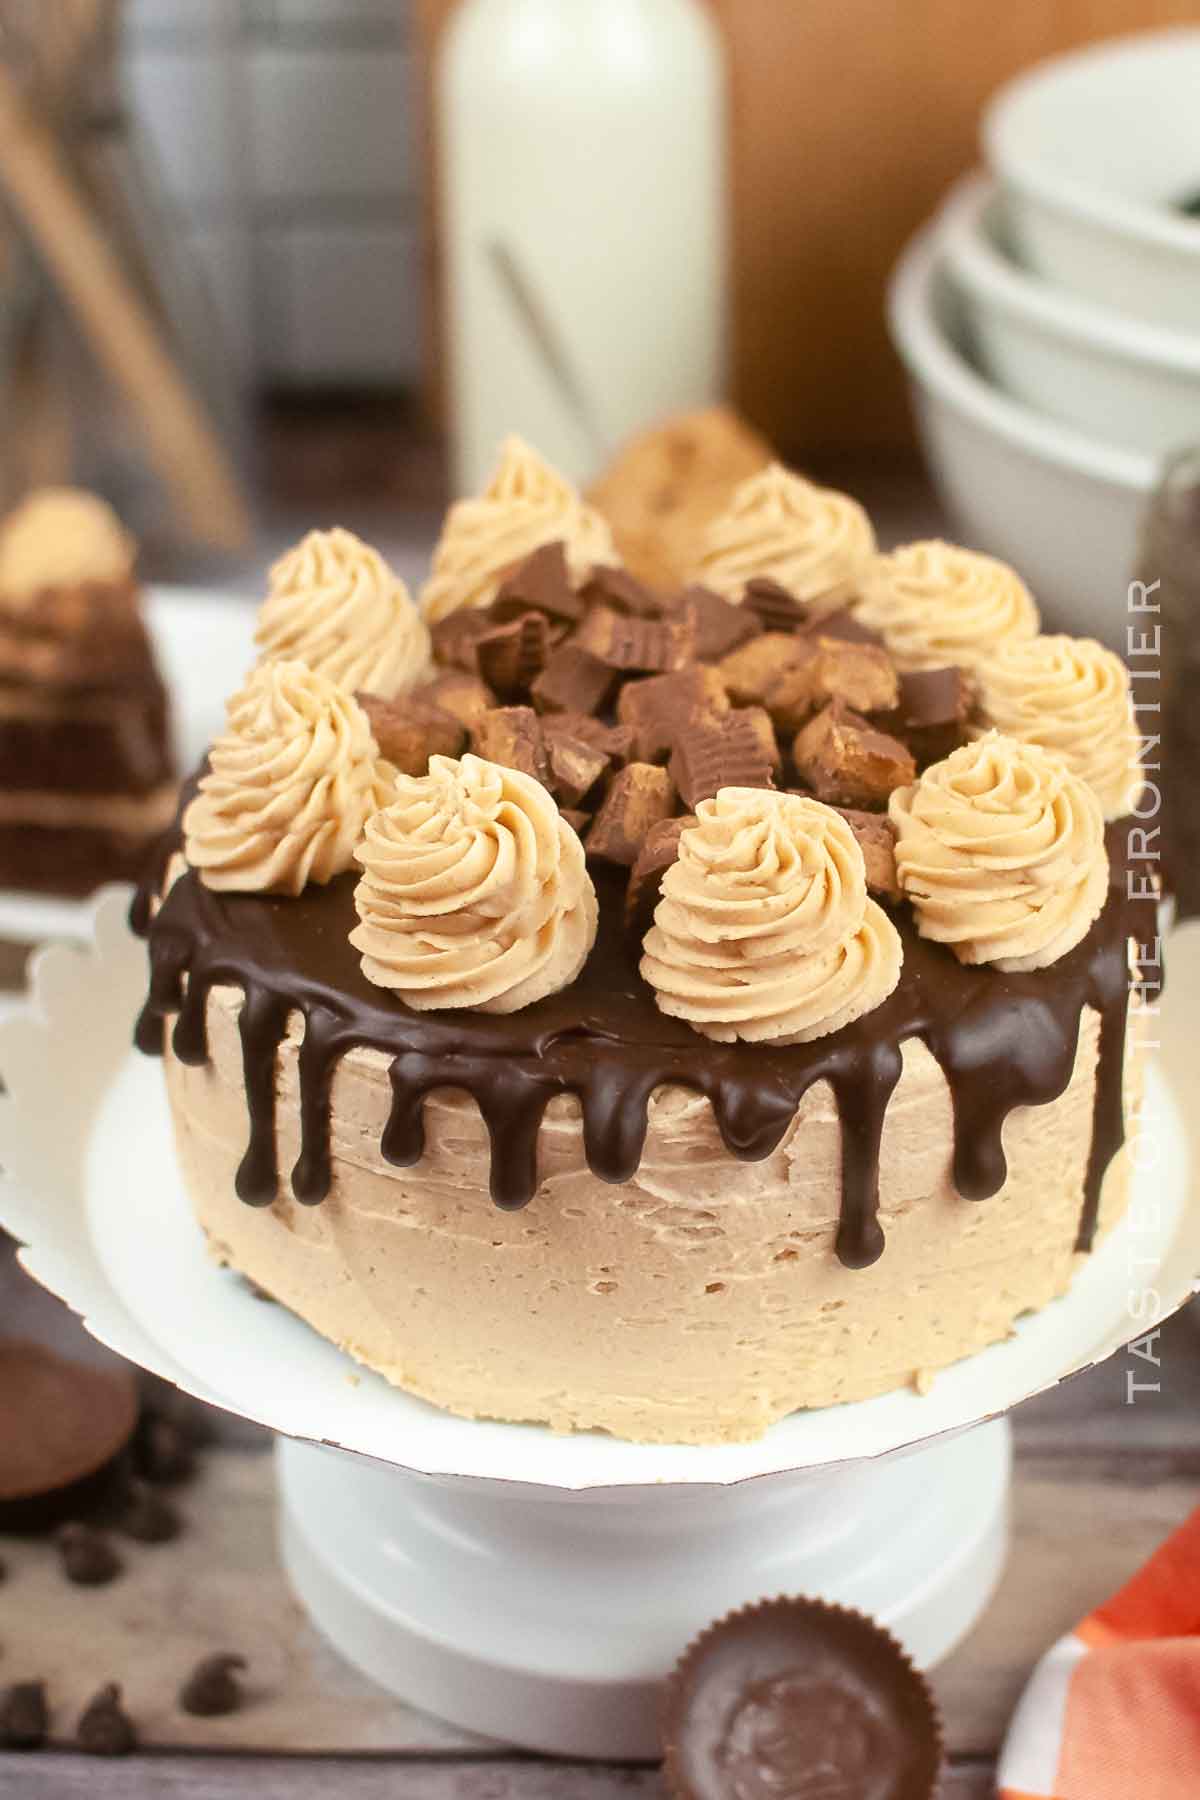 Chocolate Cake with Peanut Butter Frosting recipe